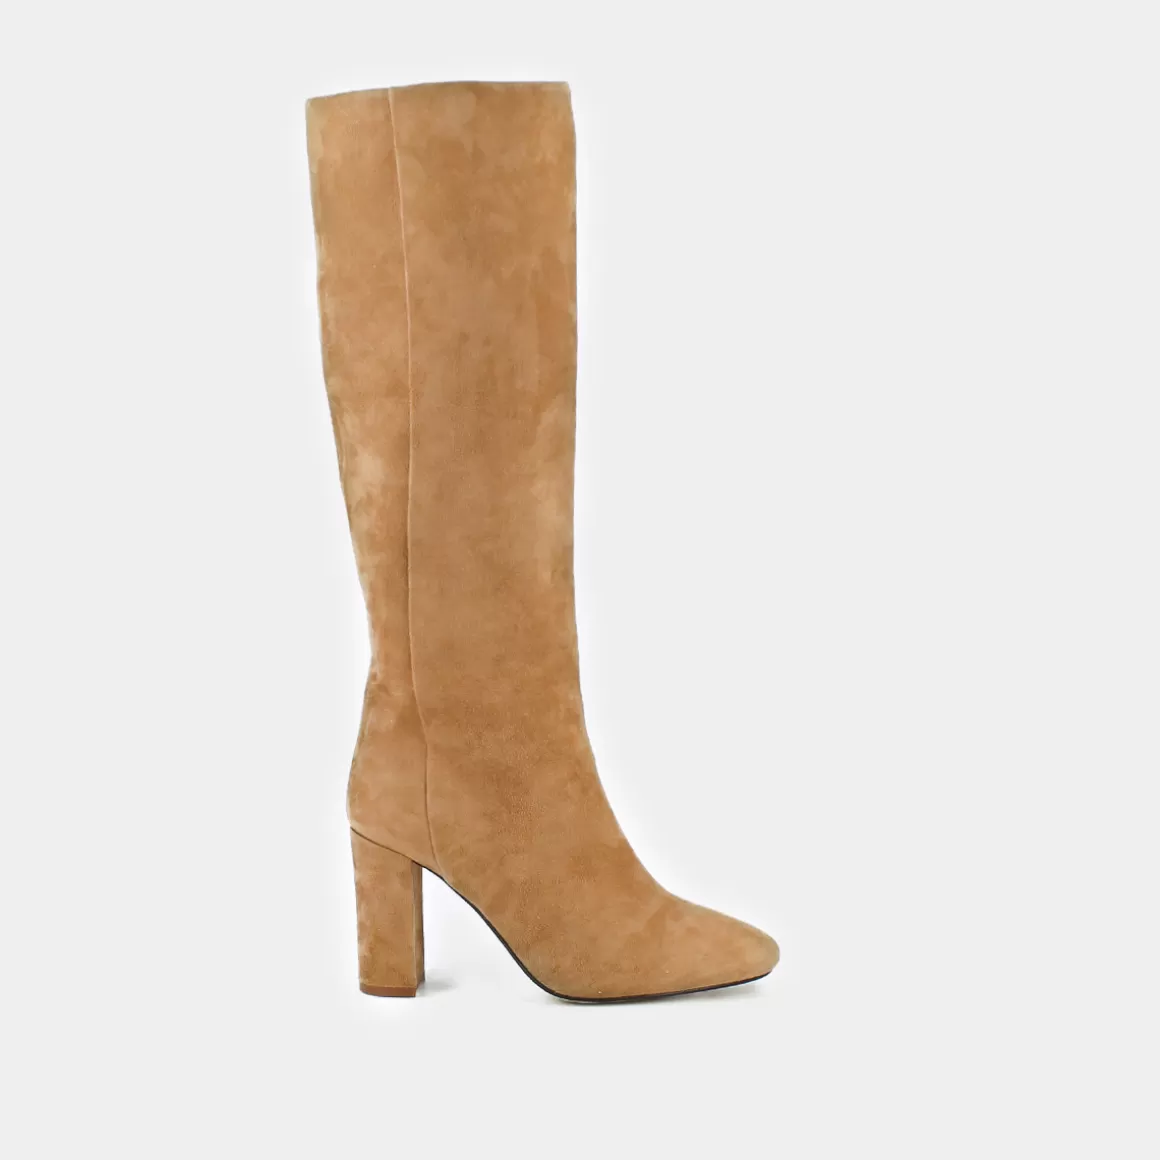 High boots with square heel<Jonak Flash Sale